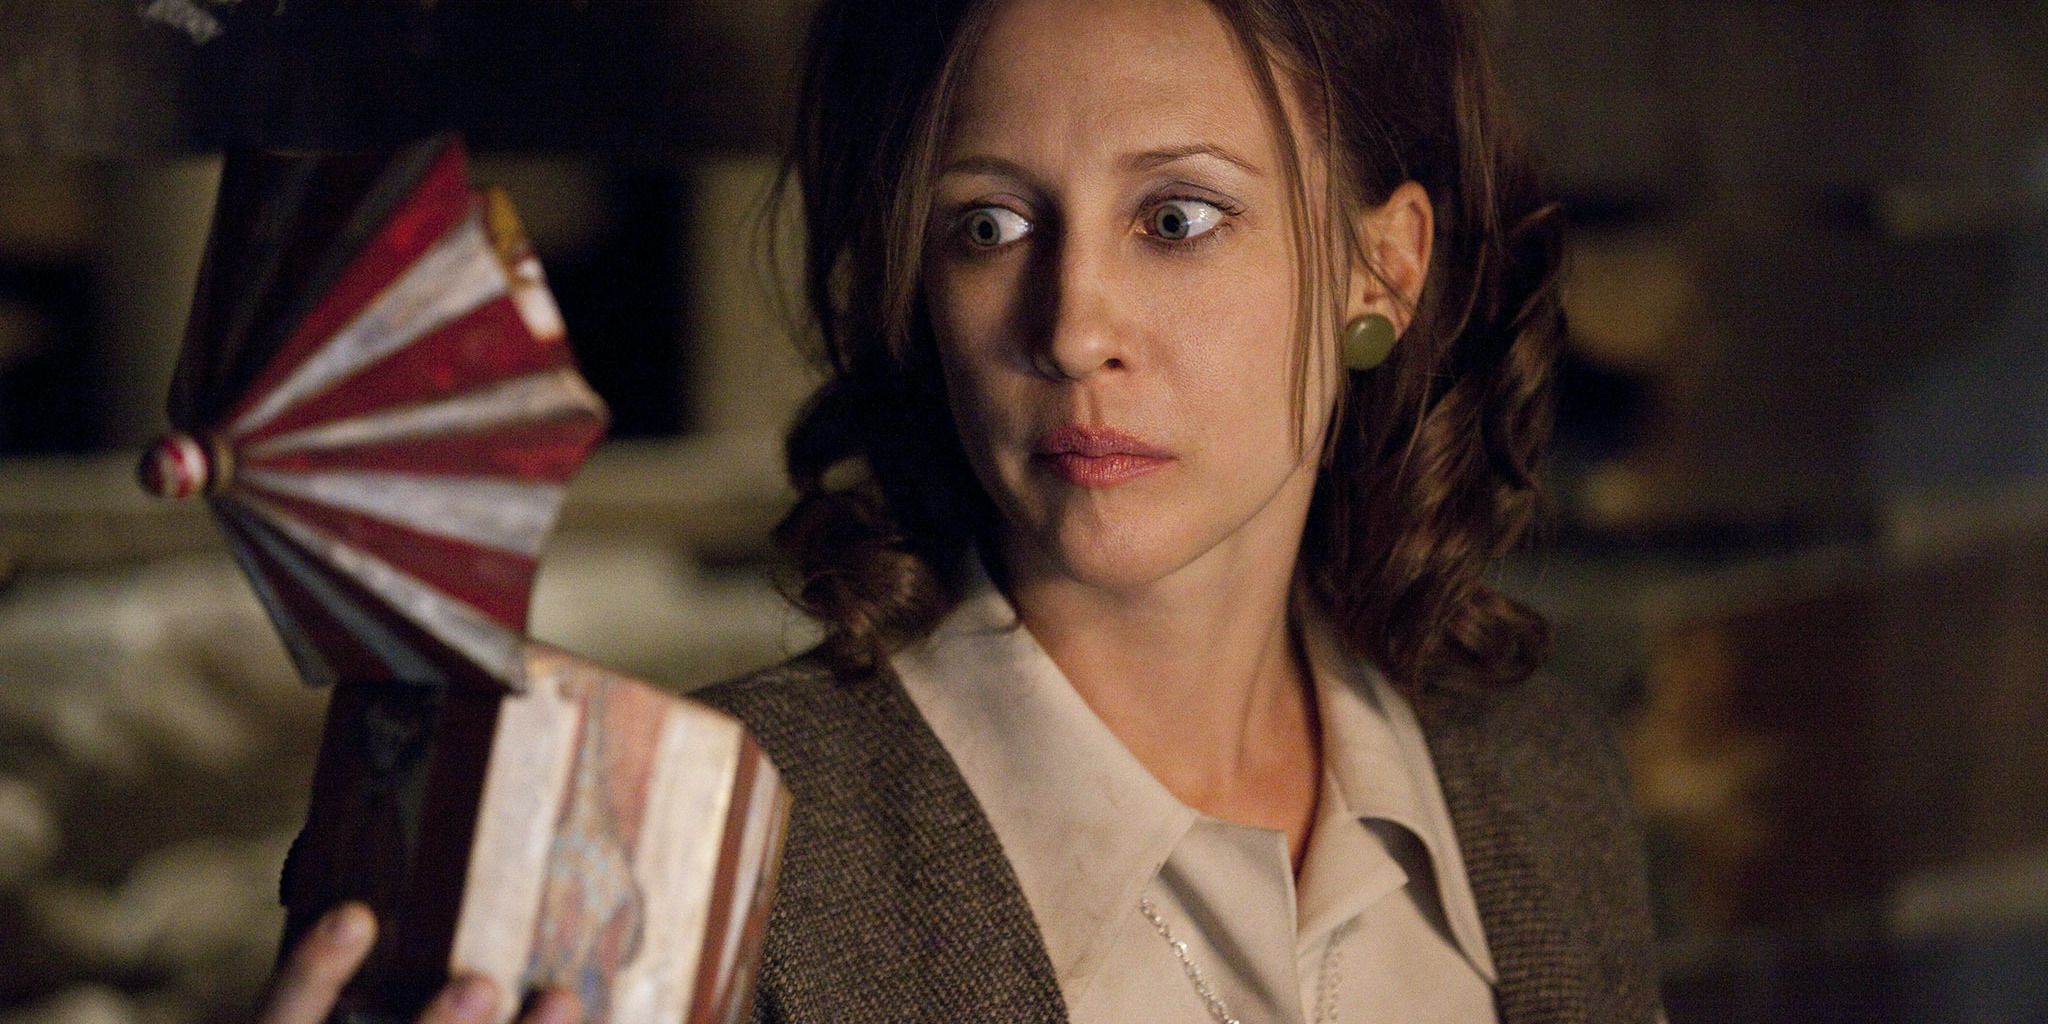 Lorraine Warren looking into the music box with wide eyes in The Conjuring 2013